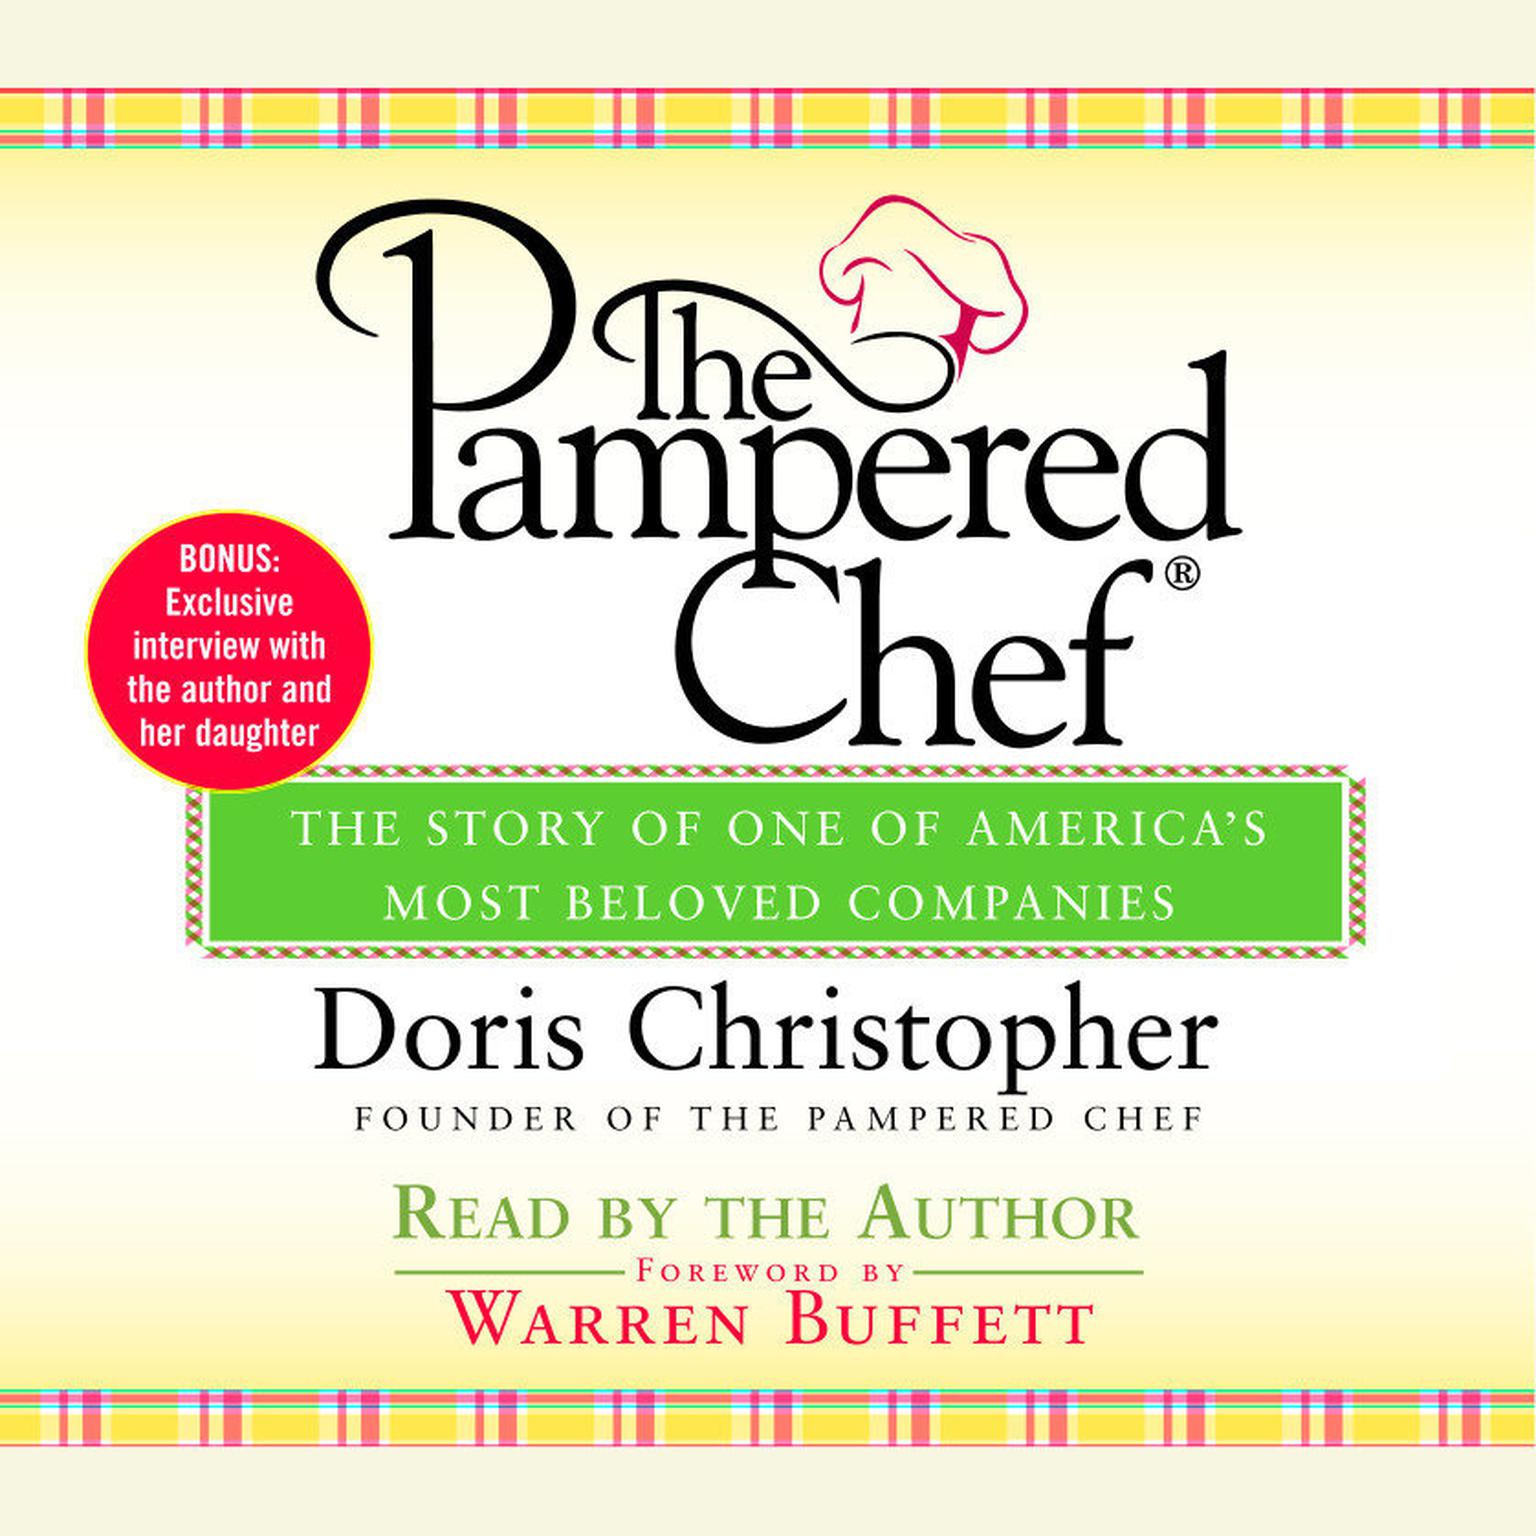 The Pampered Chef (Abridged): The Story of One of Americas Most Beloved Companies Audiobook, by Doris Christopher